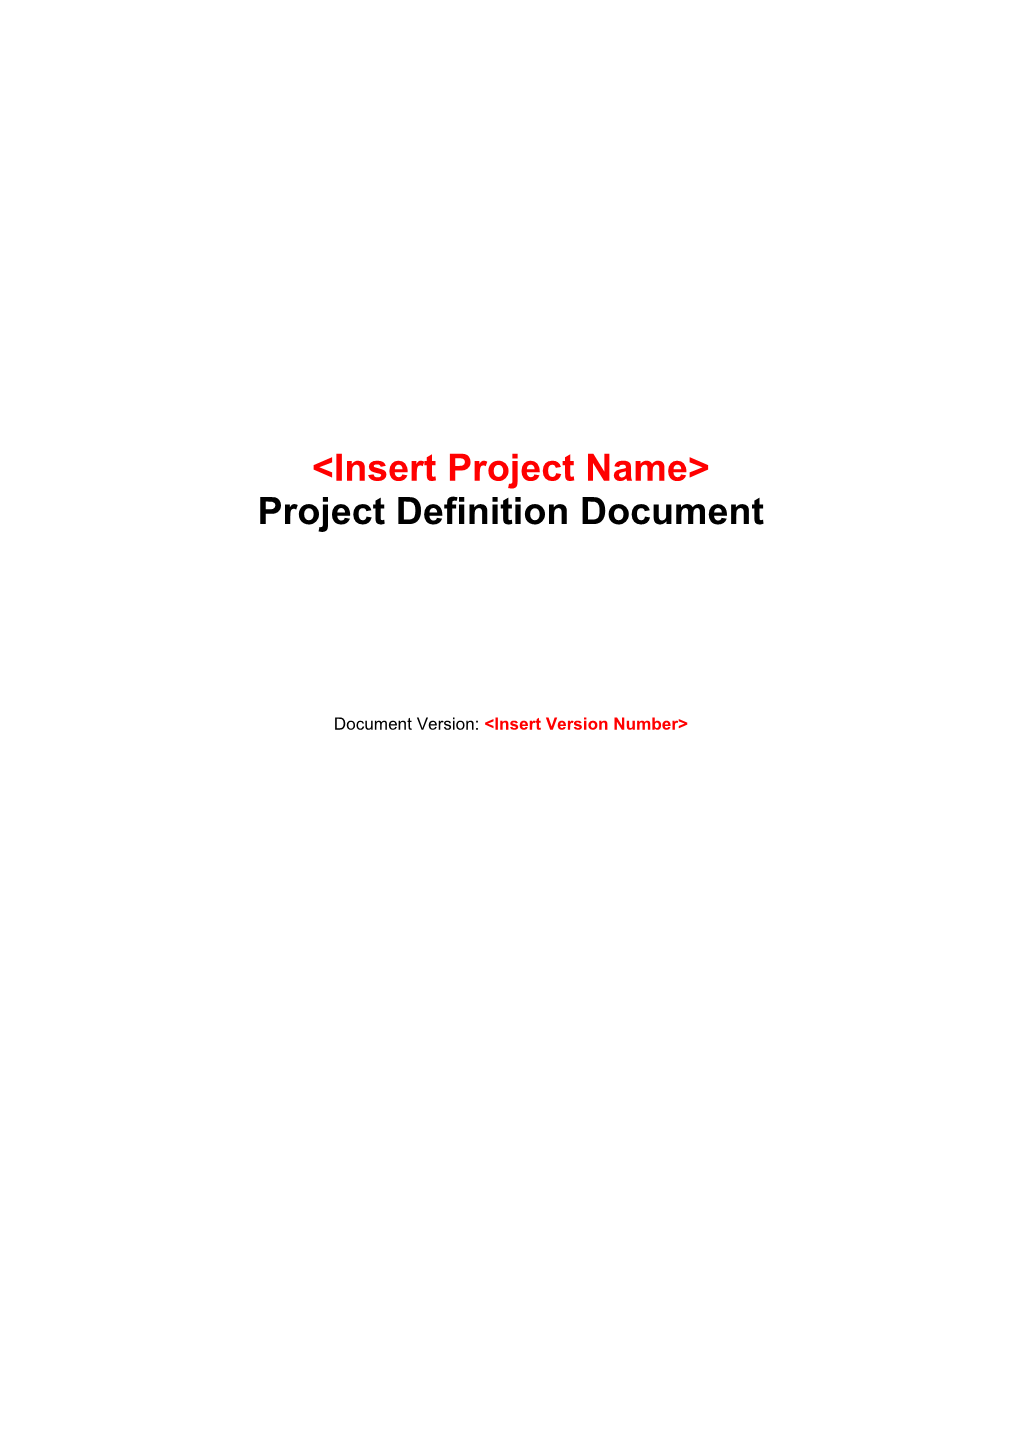 &lt;Insert Project Name&gt; Project Definition Document